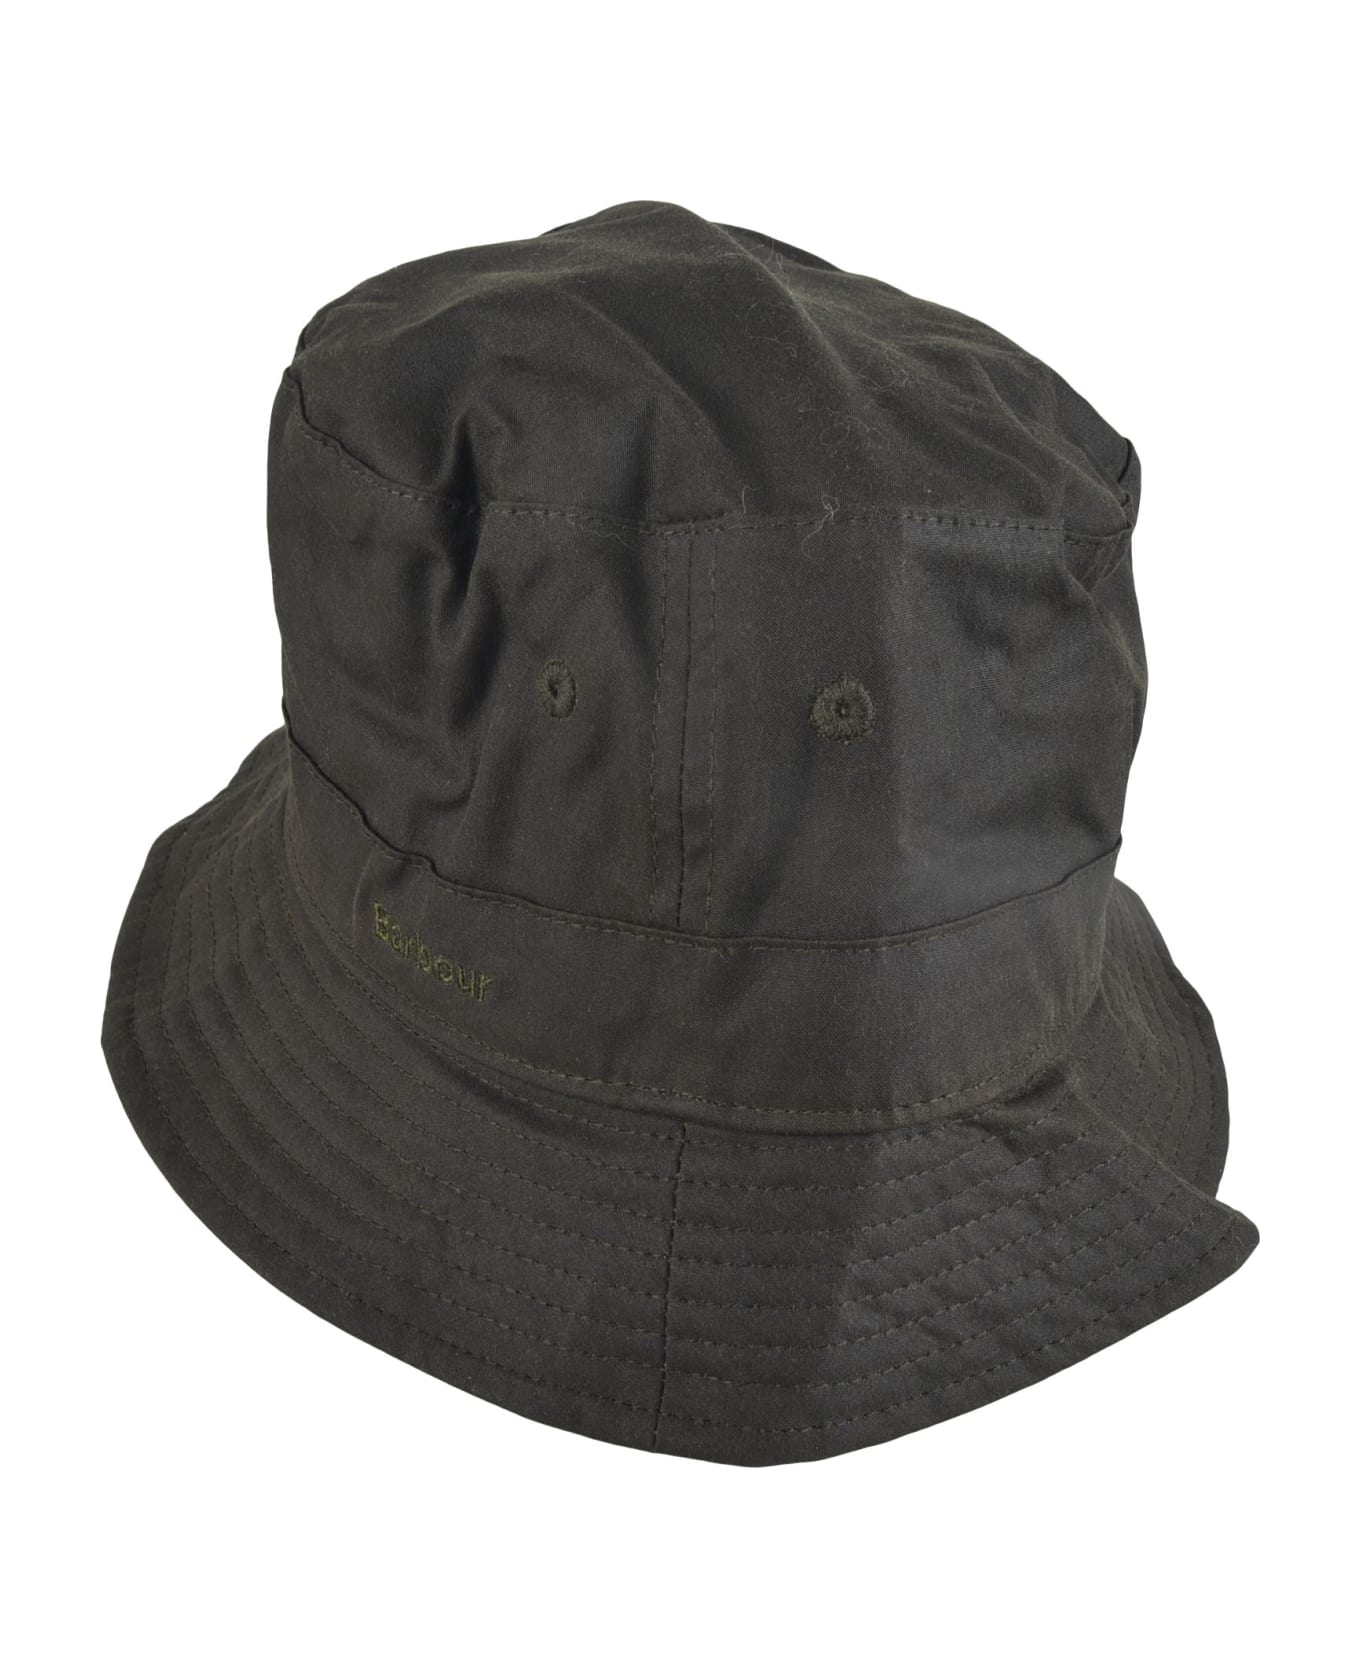 Barbour Logo Classic Bucket Hat - Olive